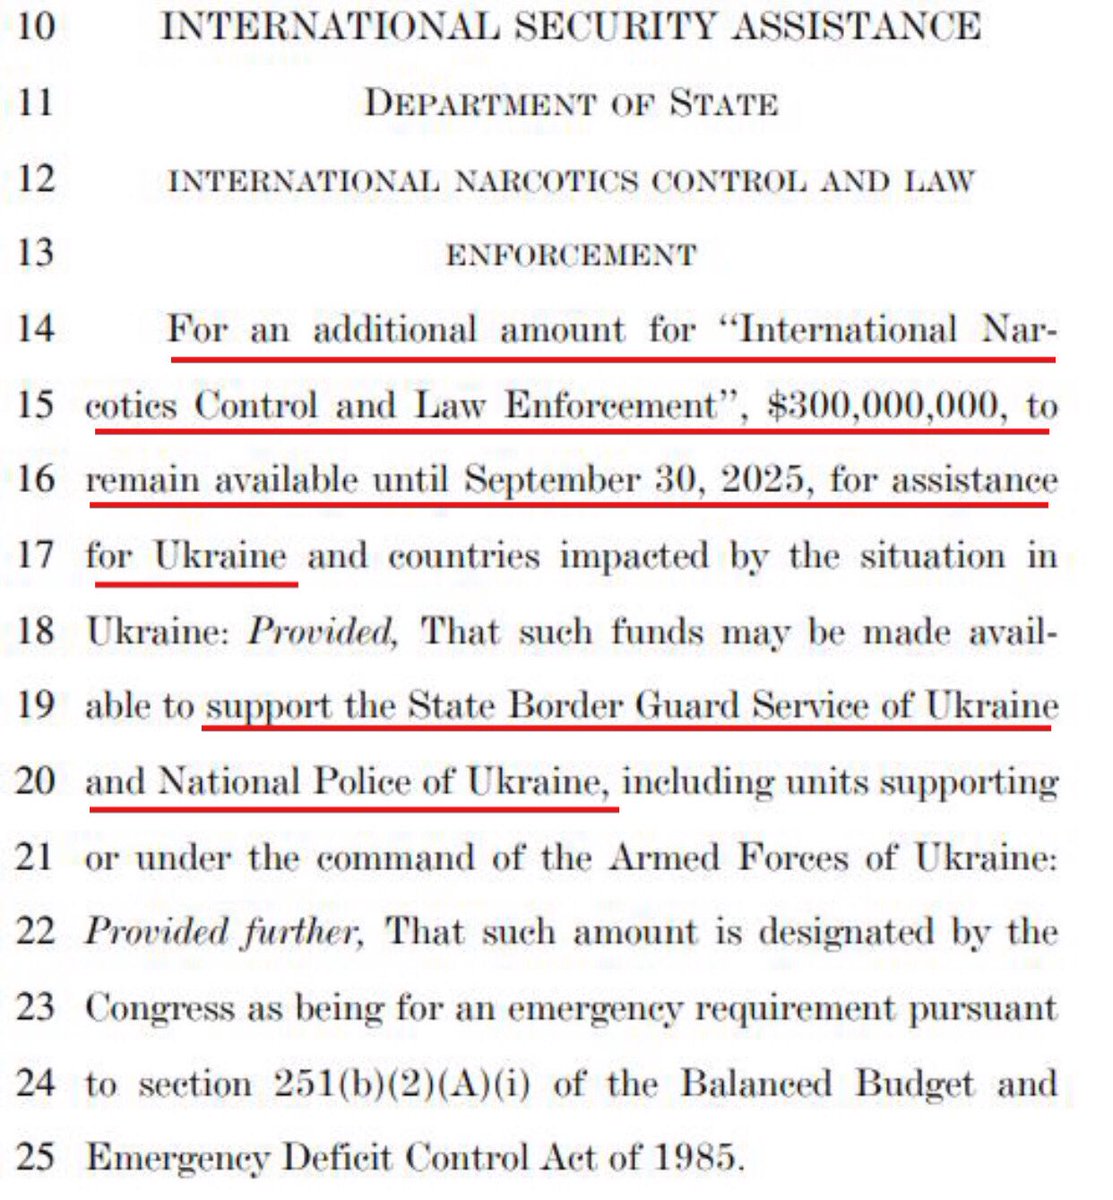 LOOK AT THIS! 

An ADDITIONAL $300 MILLION will go to Ukraine to secure their border, & pay their border police, while our border is WIDE OPEN, and RECEIVES NOTHING!